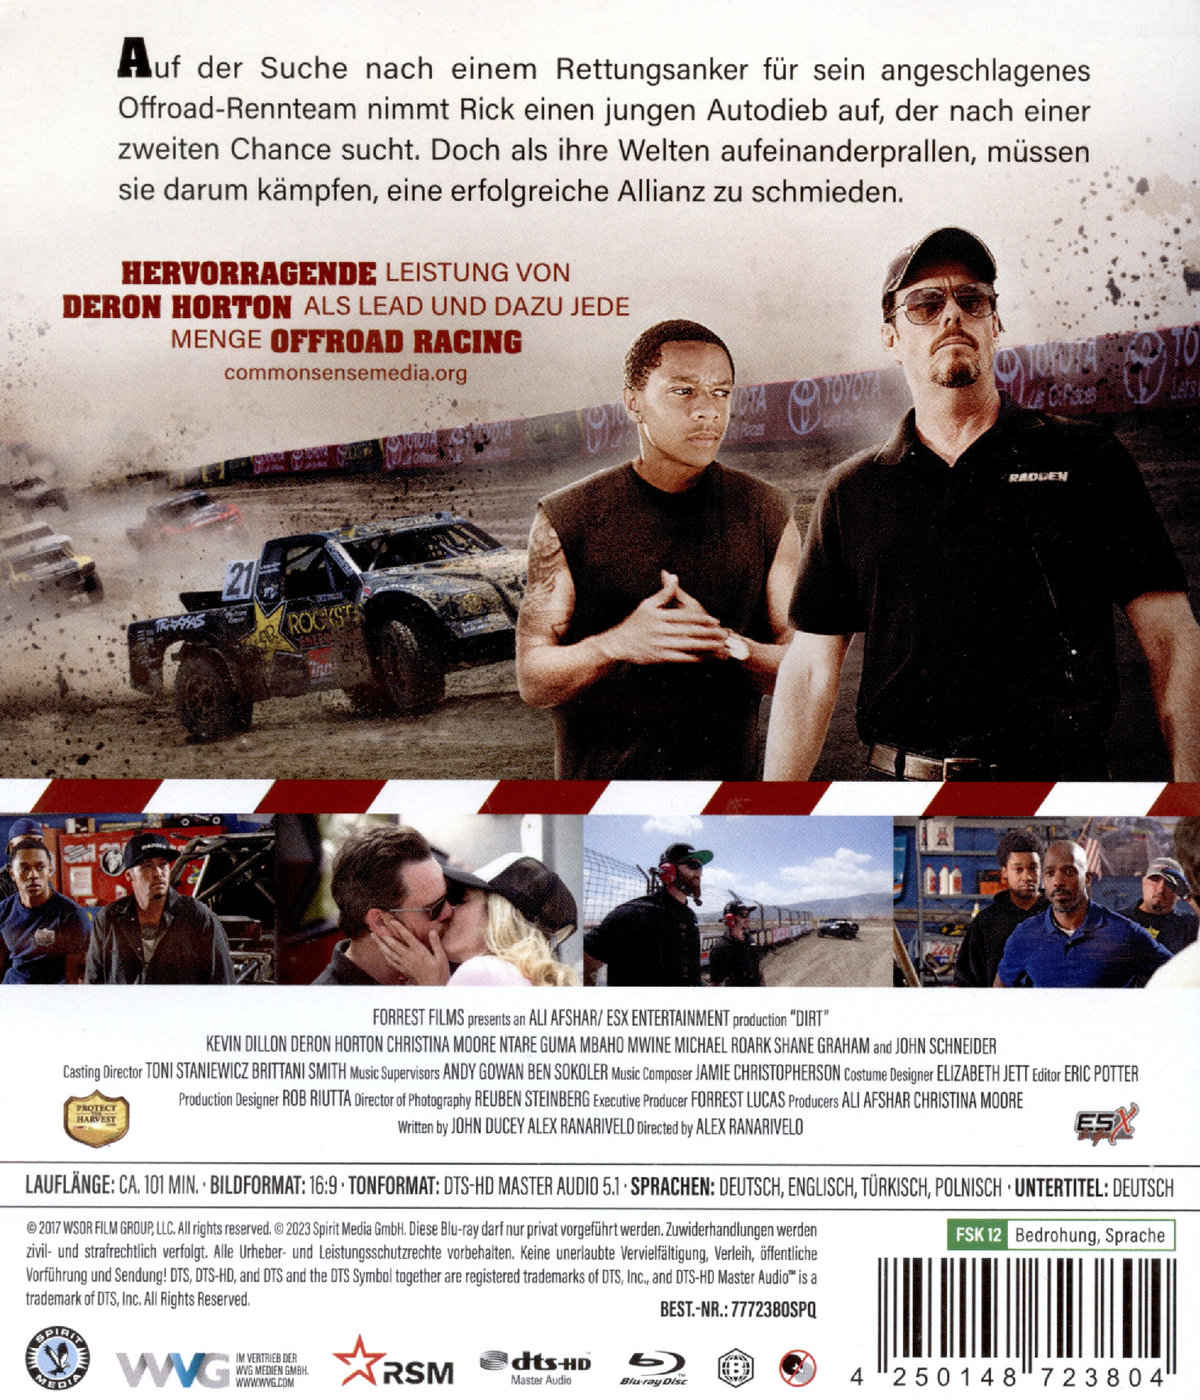 Dirt - The Race to Redemption  (Blu-ray Disc)